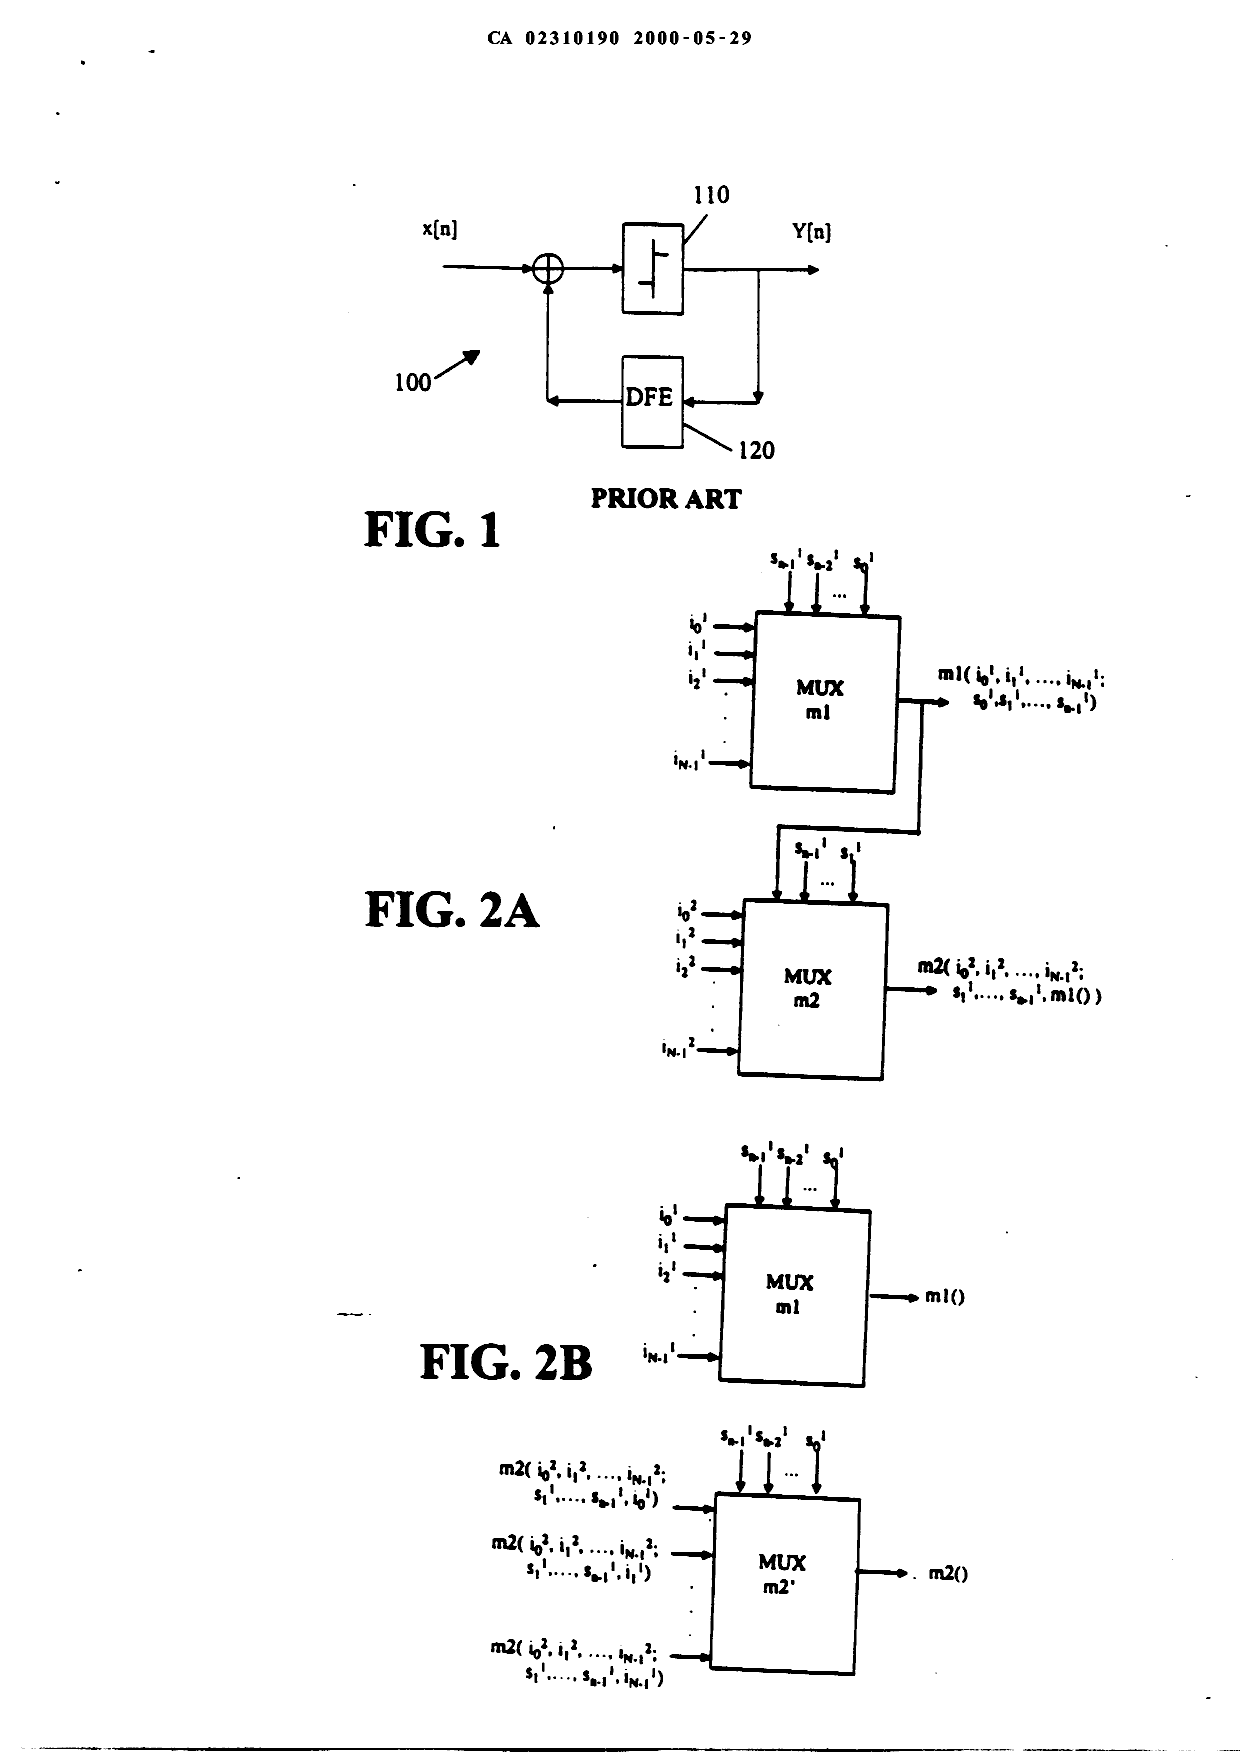 Canadian Patent Document 2310190. Drawings 20000529. Image 1 of 3